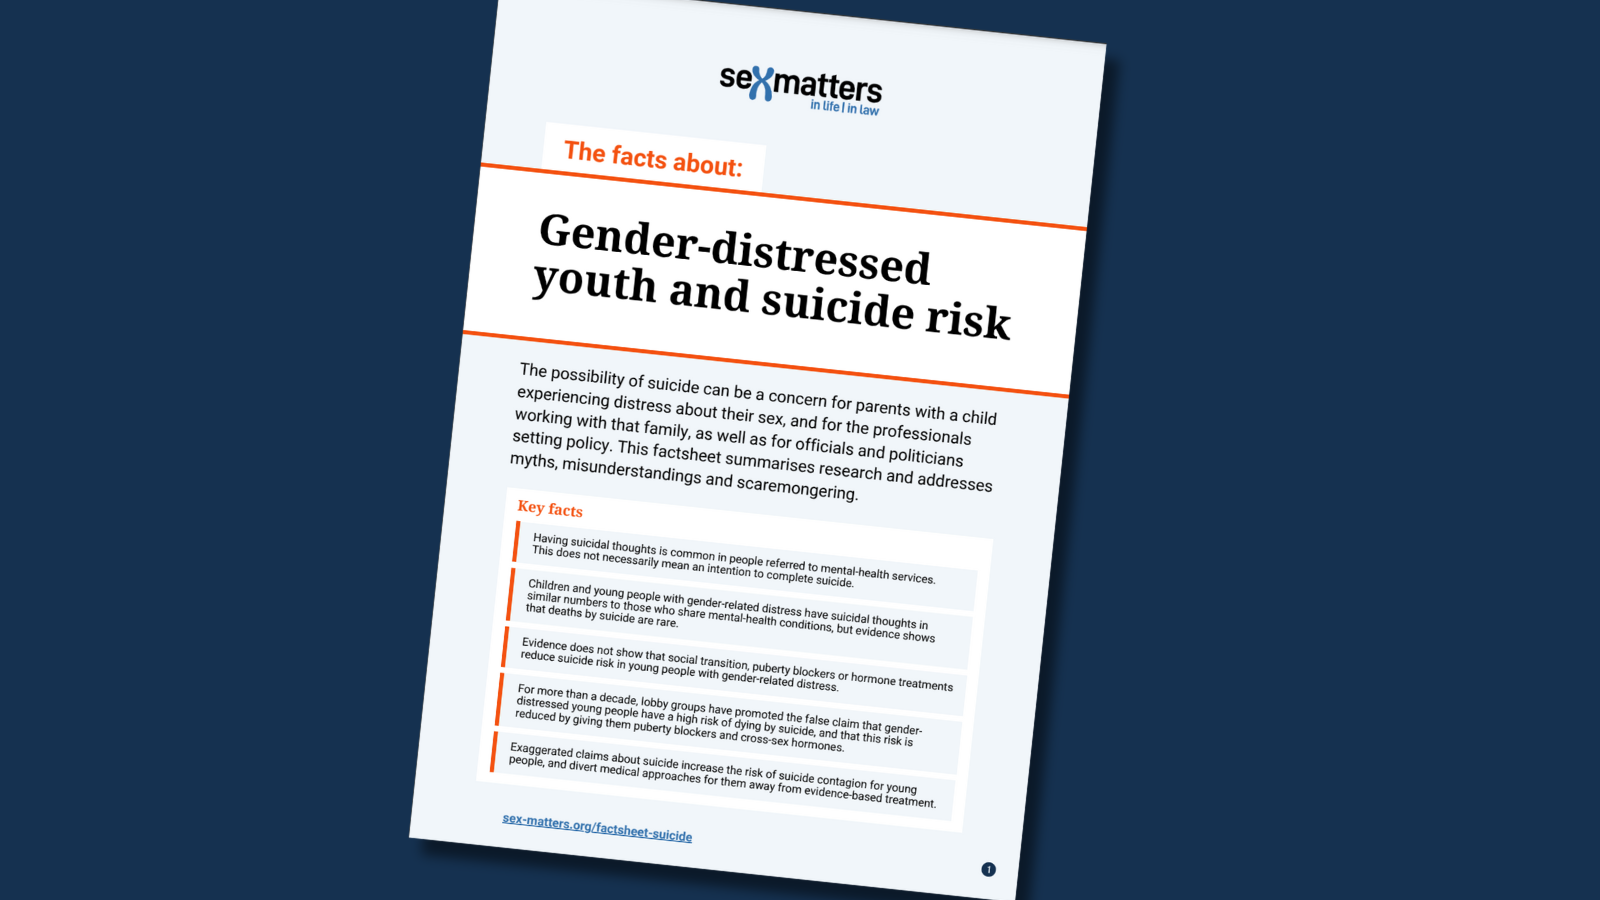 Gender-distressed youth and suicide risk